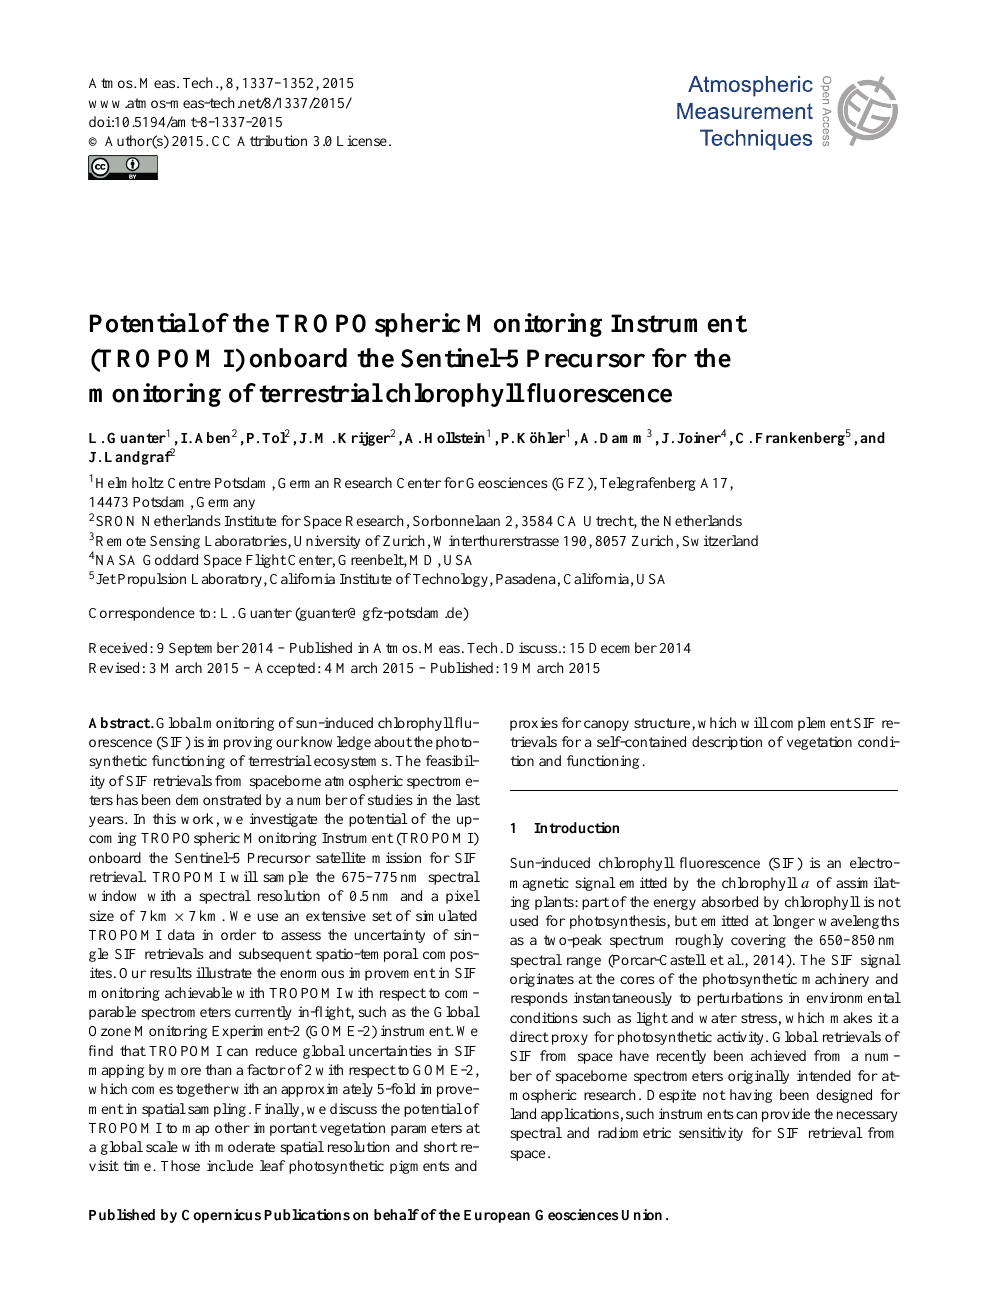 BG - Sun-induced fluorescence as a proxy for primary productivity